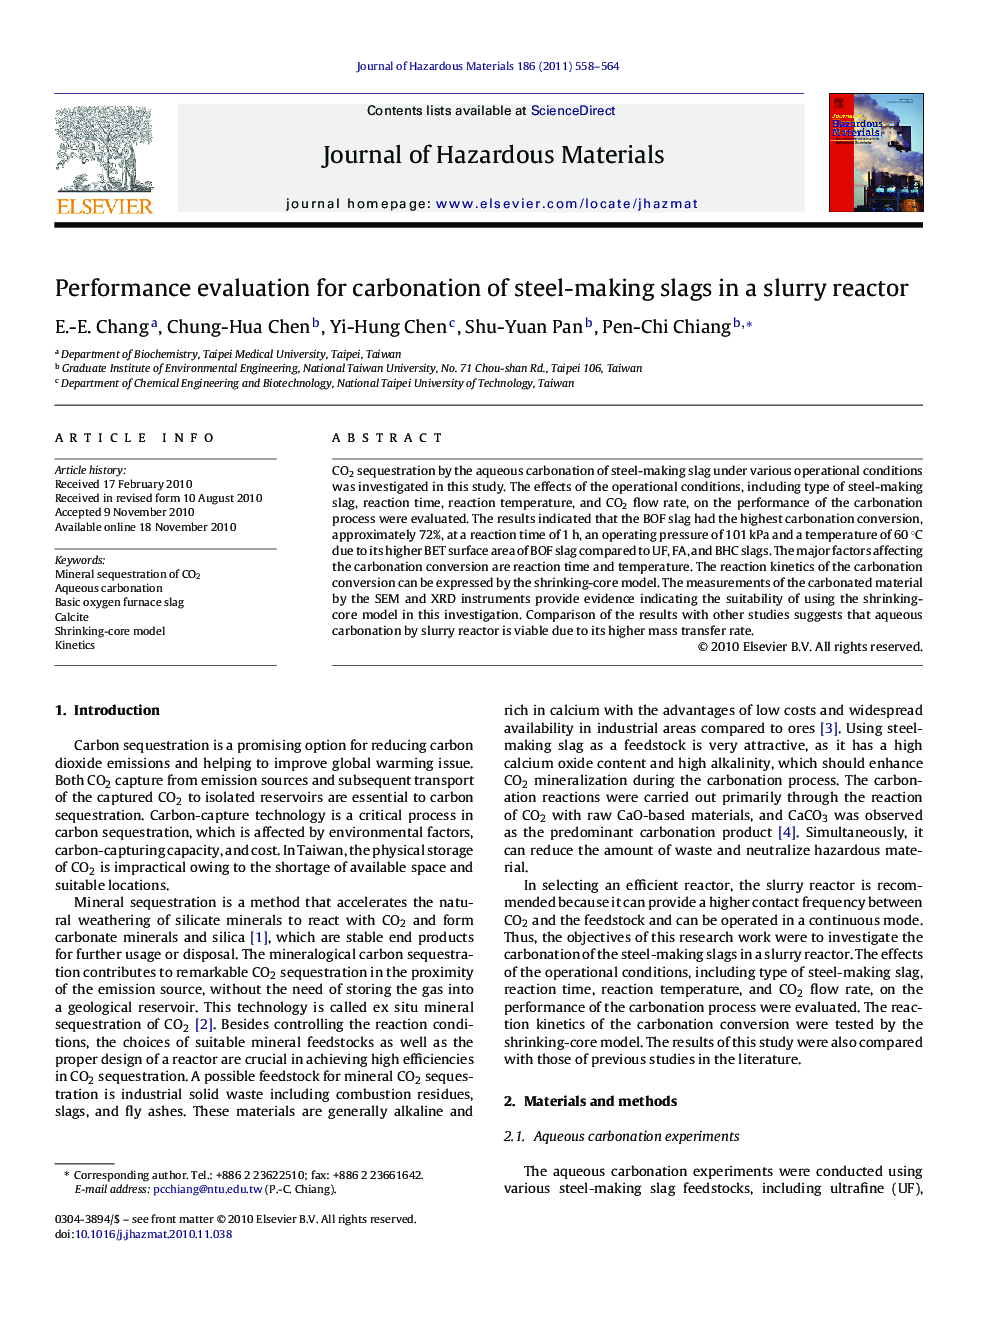 Performance evaluation for carbonation of steel-making slags in a slurry reactor